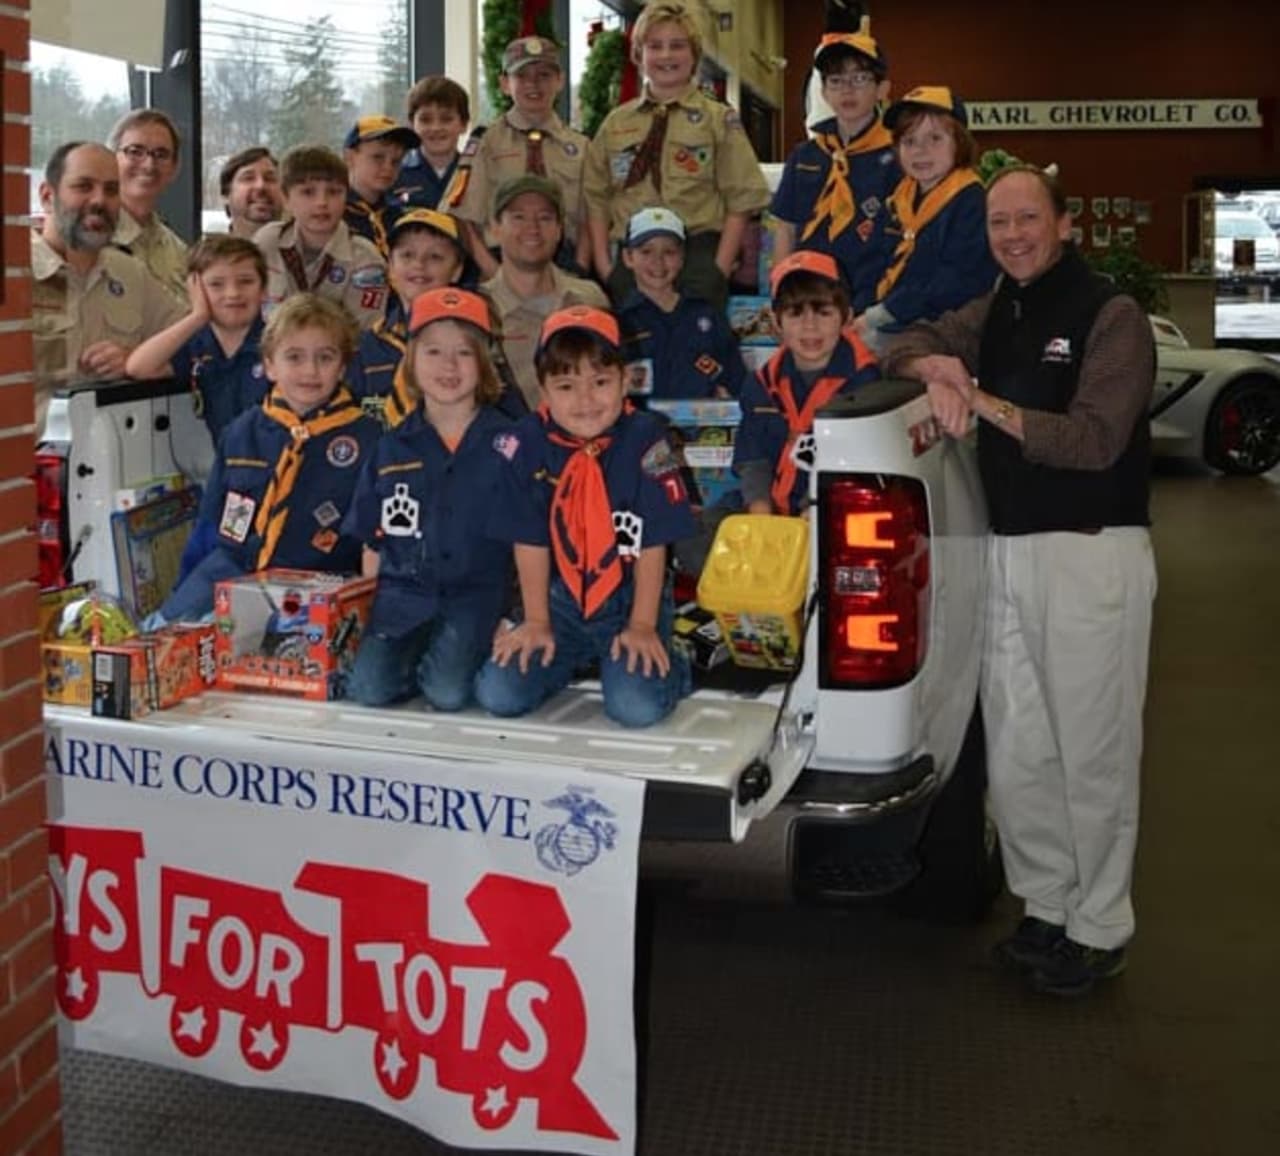 New Canaan's Cub Scout Pack 70 at KARL Chevrolet this past Saturday. 